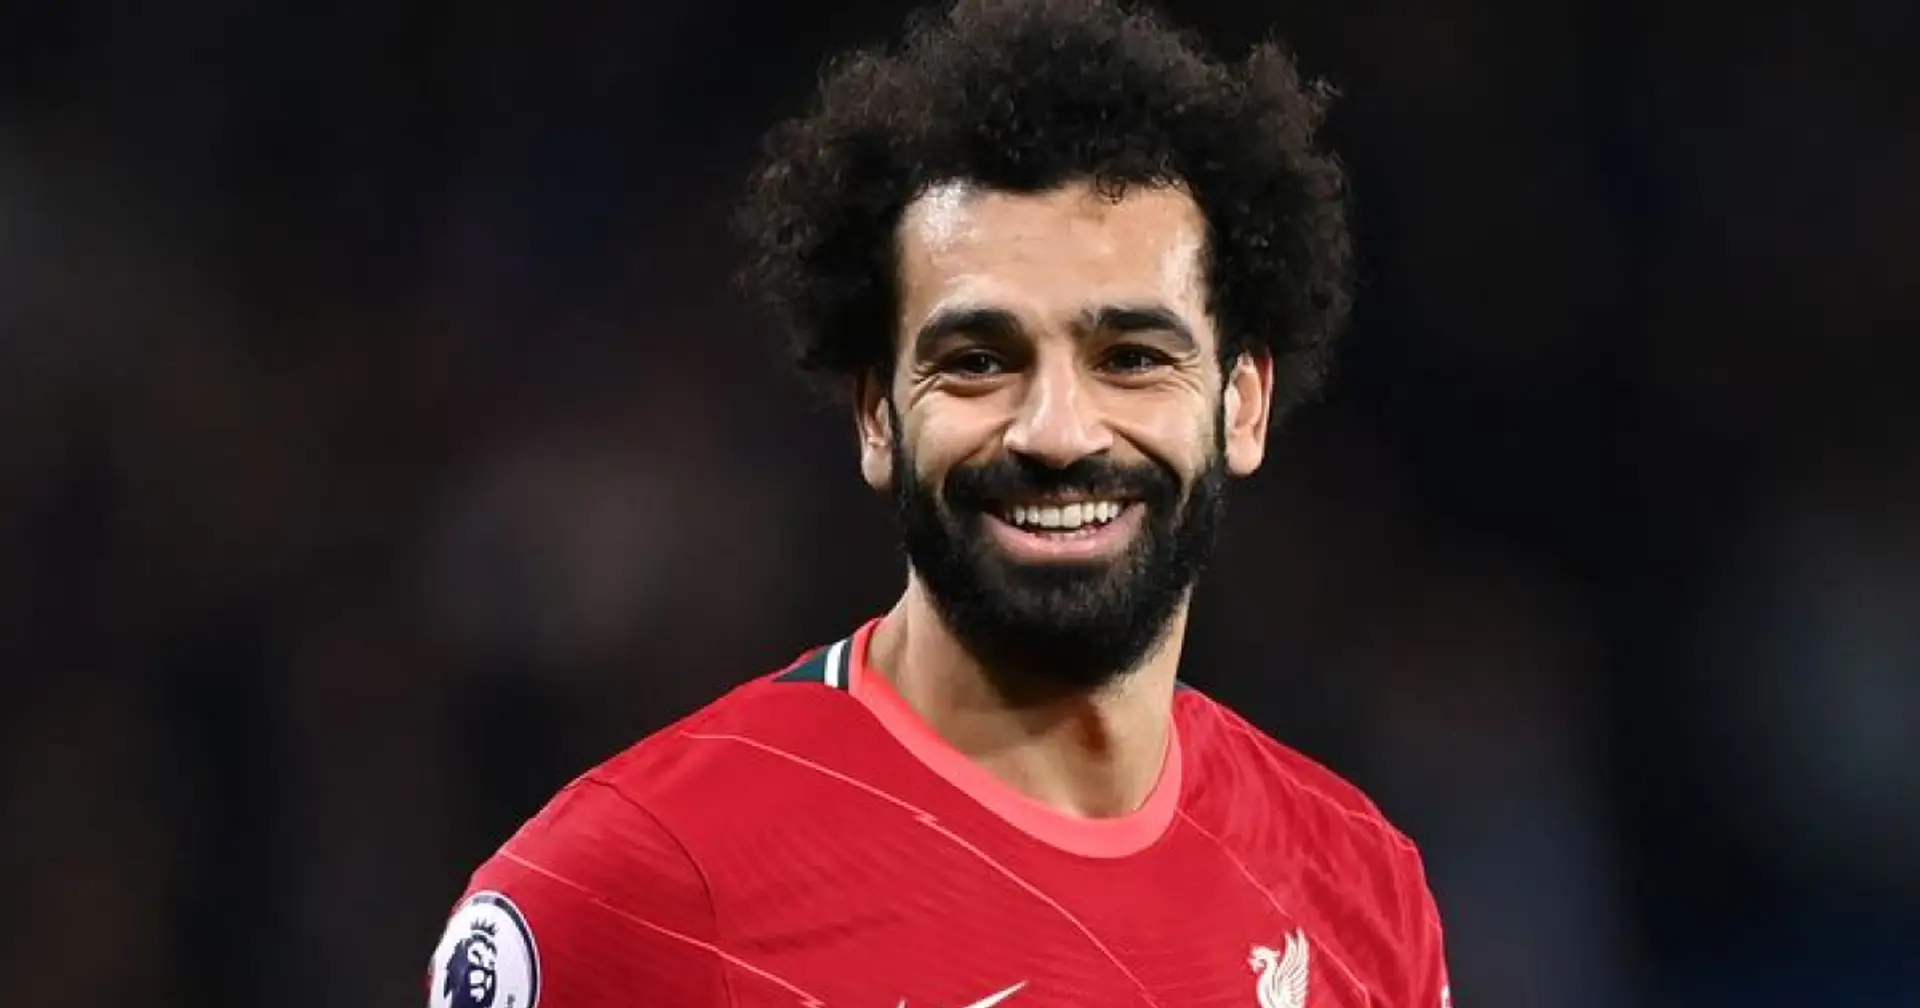 Saudis in London for Salah talks & 3 other big Liverpool stories you could've missed